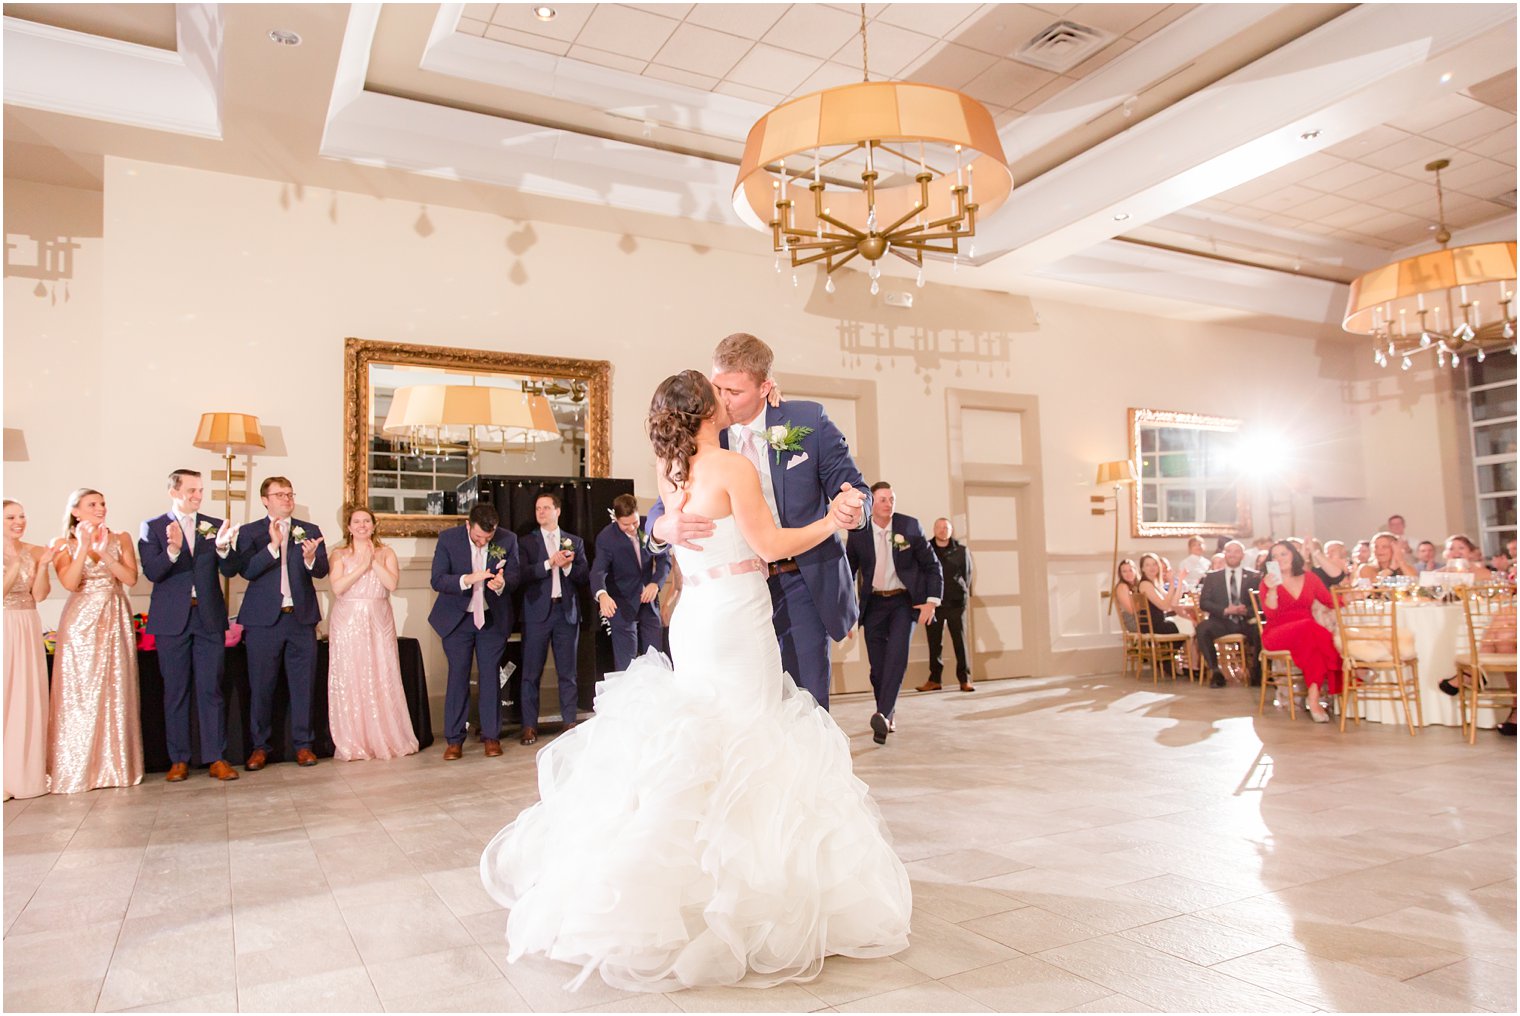 Bride and groom dancing their first dance at Stone House at Stirling Ridge in Warren, NJ